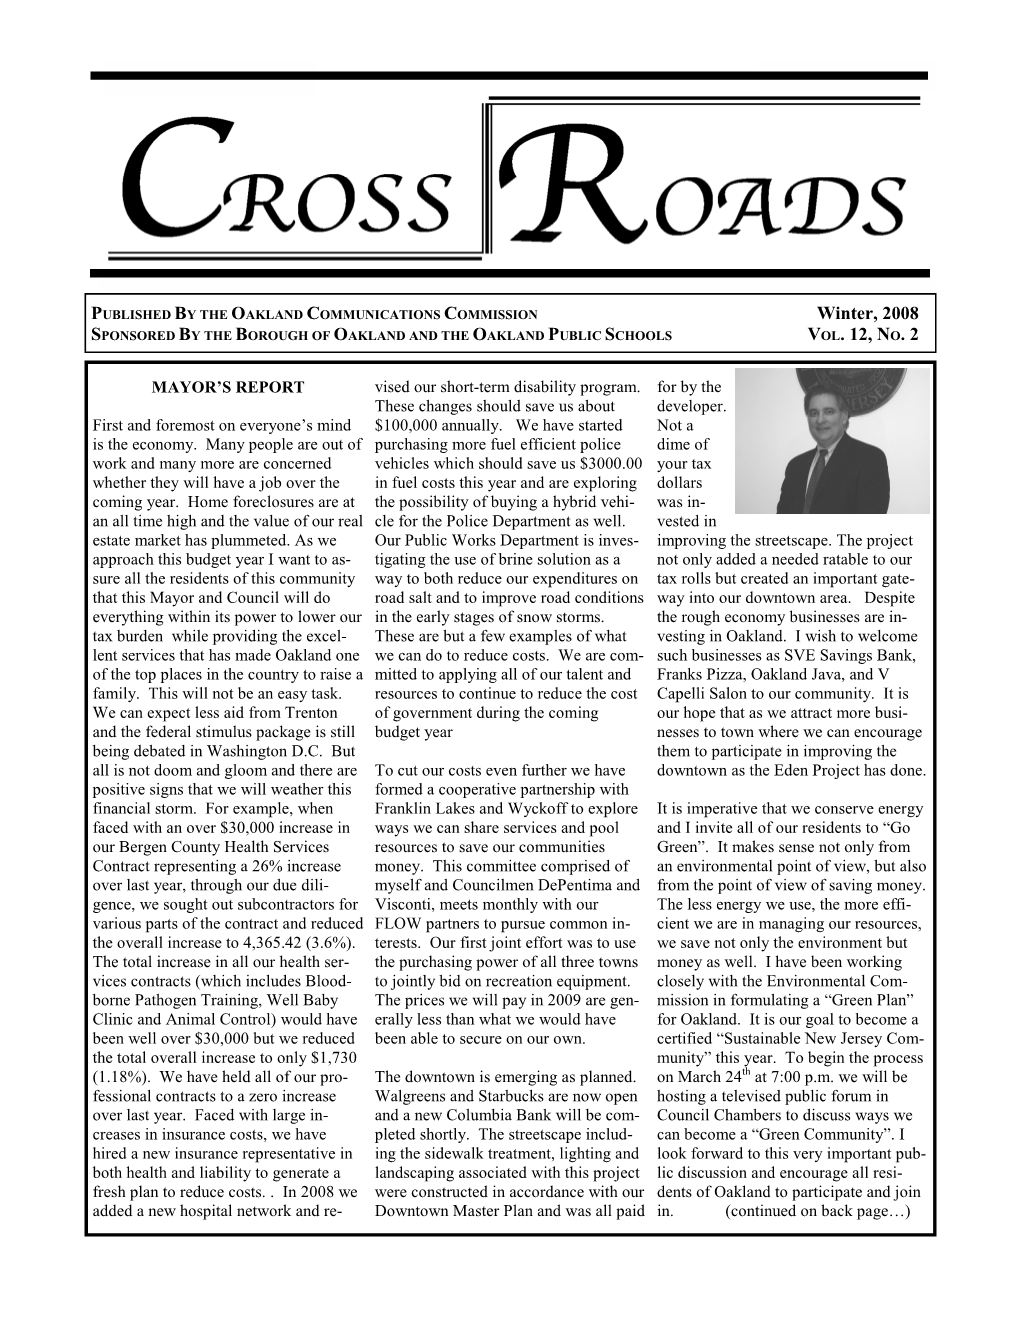 Winter 2008 CROSSROADS Going Green in 09, with Your Help